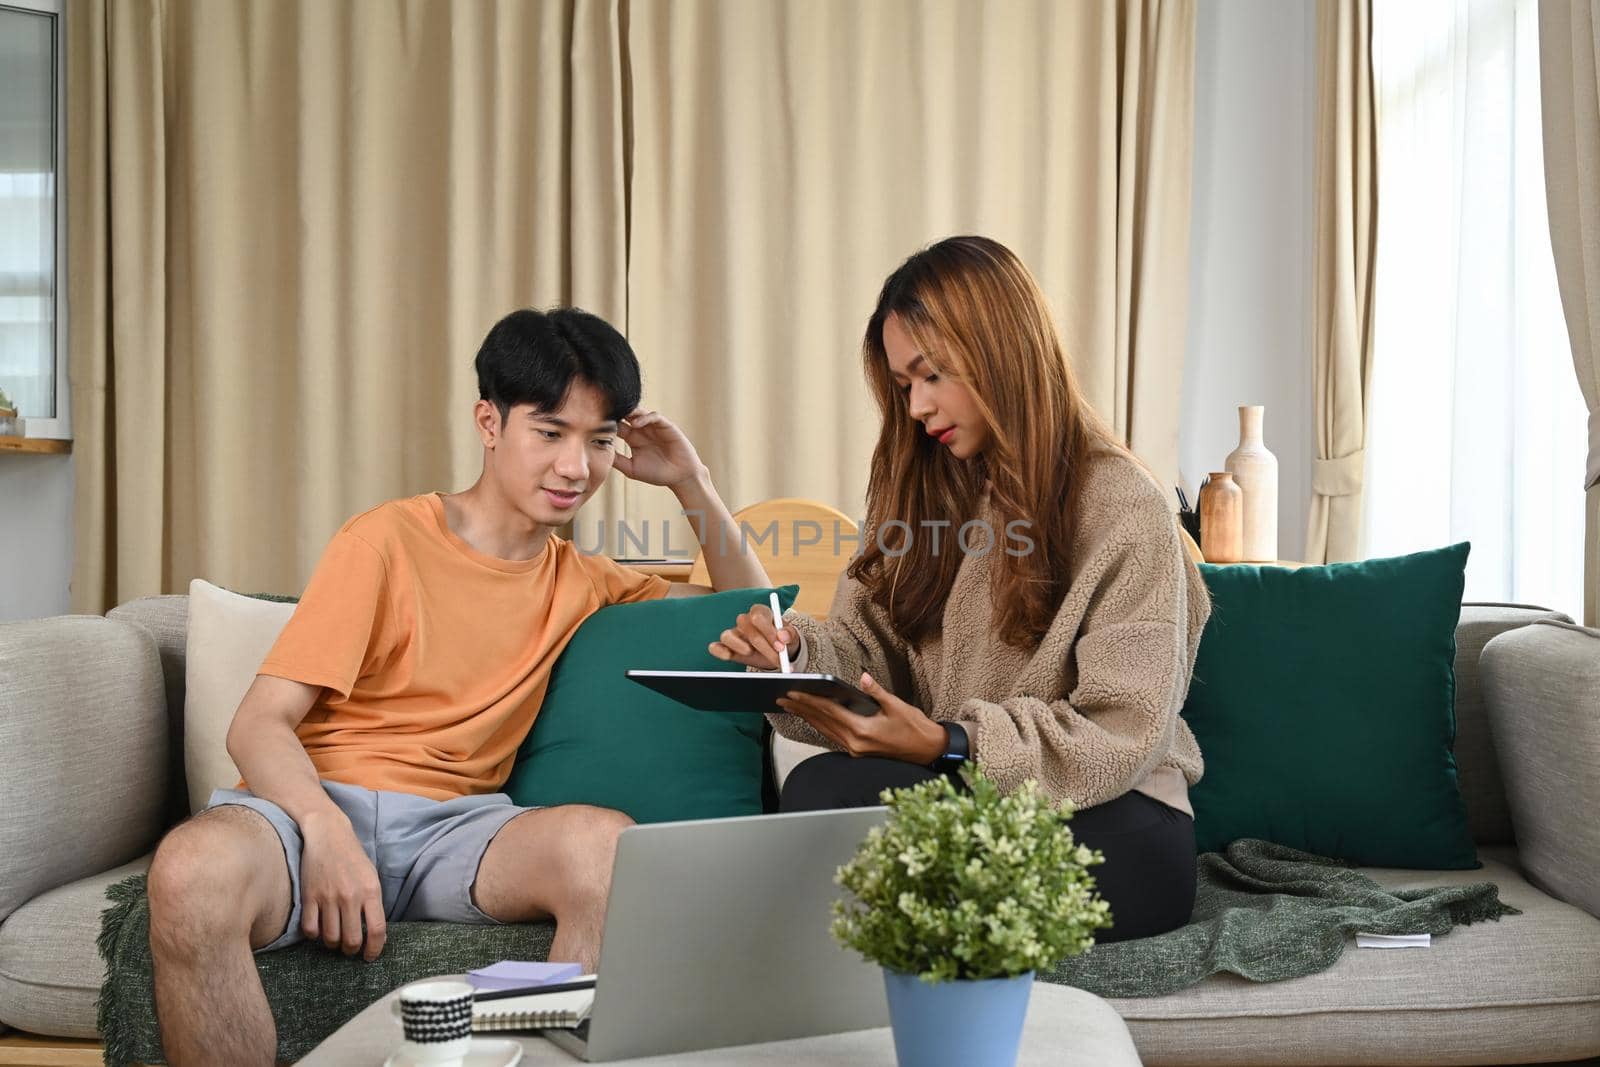 Young asian couple sitting together on couch and surfing internet with digital tablet. by prathanchorruangsak